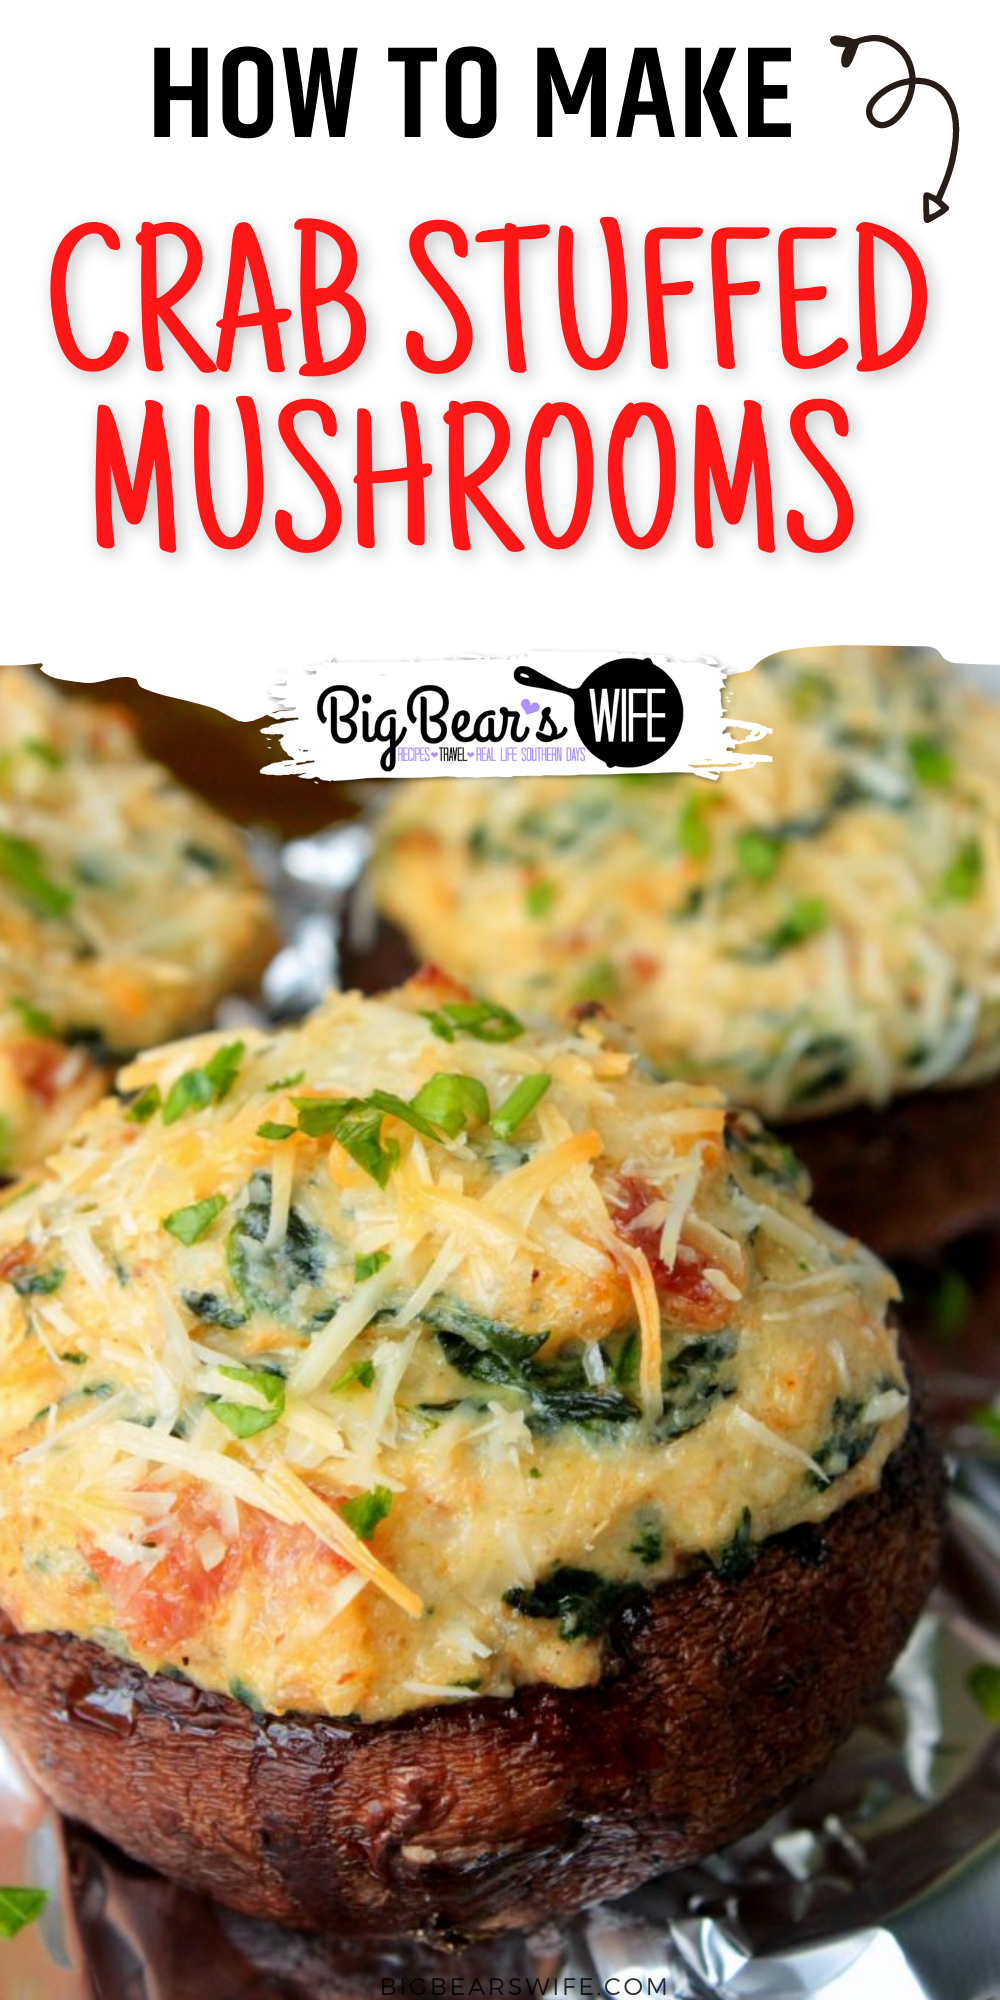 Crab Stuffed Mushrooms - These Crab Stuffed Mushrooms are filled with an easy cream cheese, crab and spinach filling! PS. there are NO breadcrumbs in this recipe! via @bigbearswife